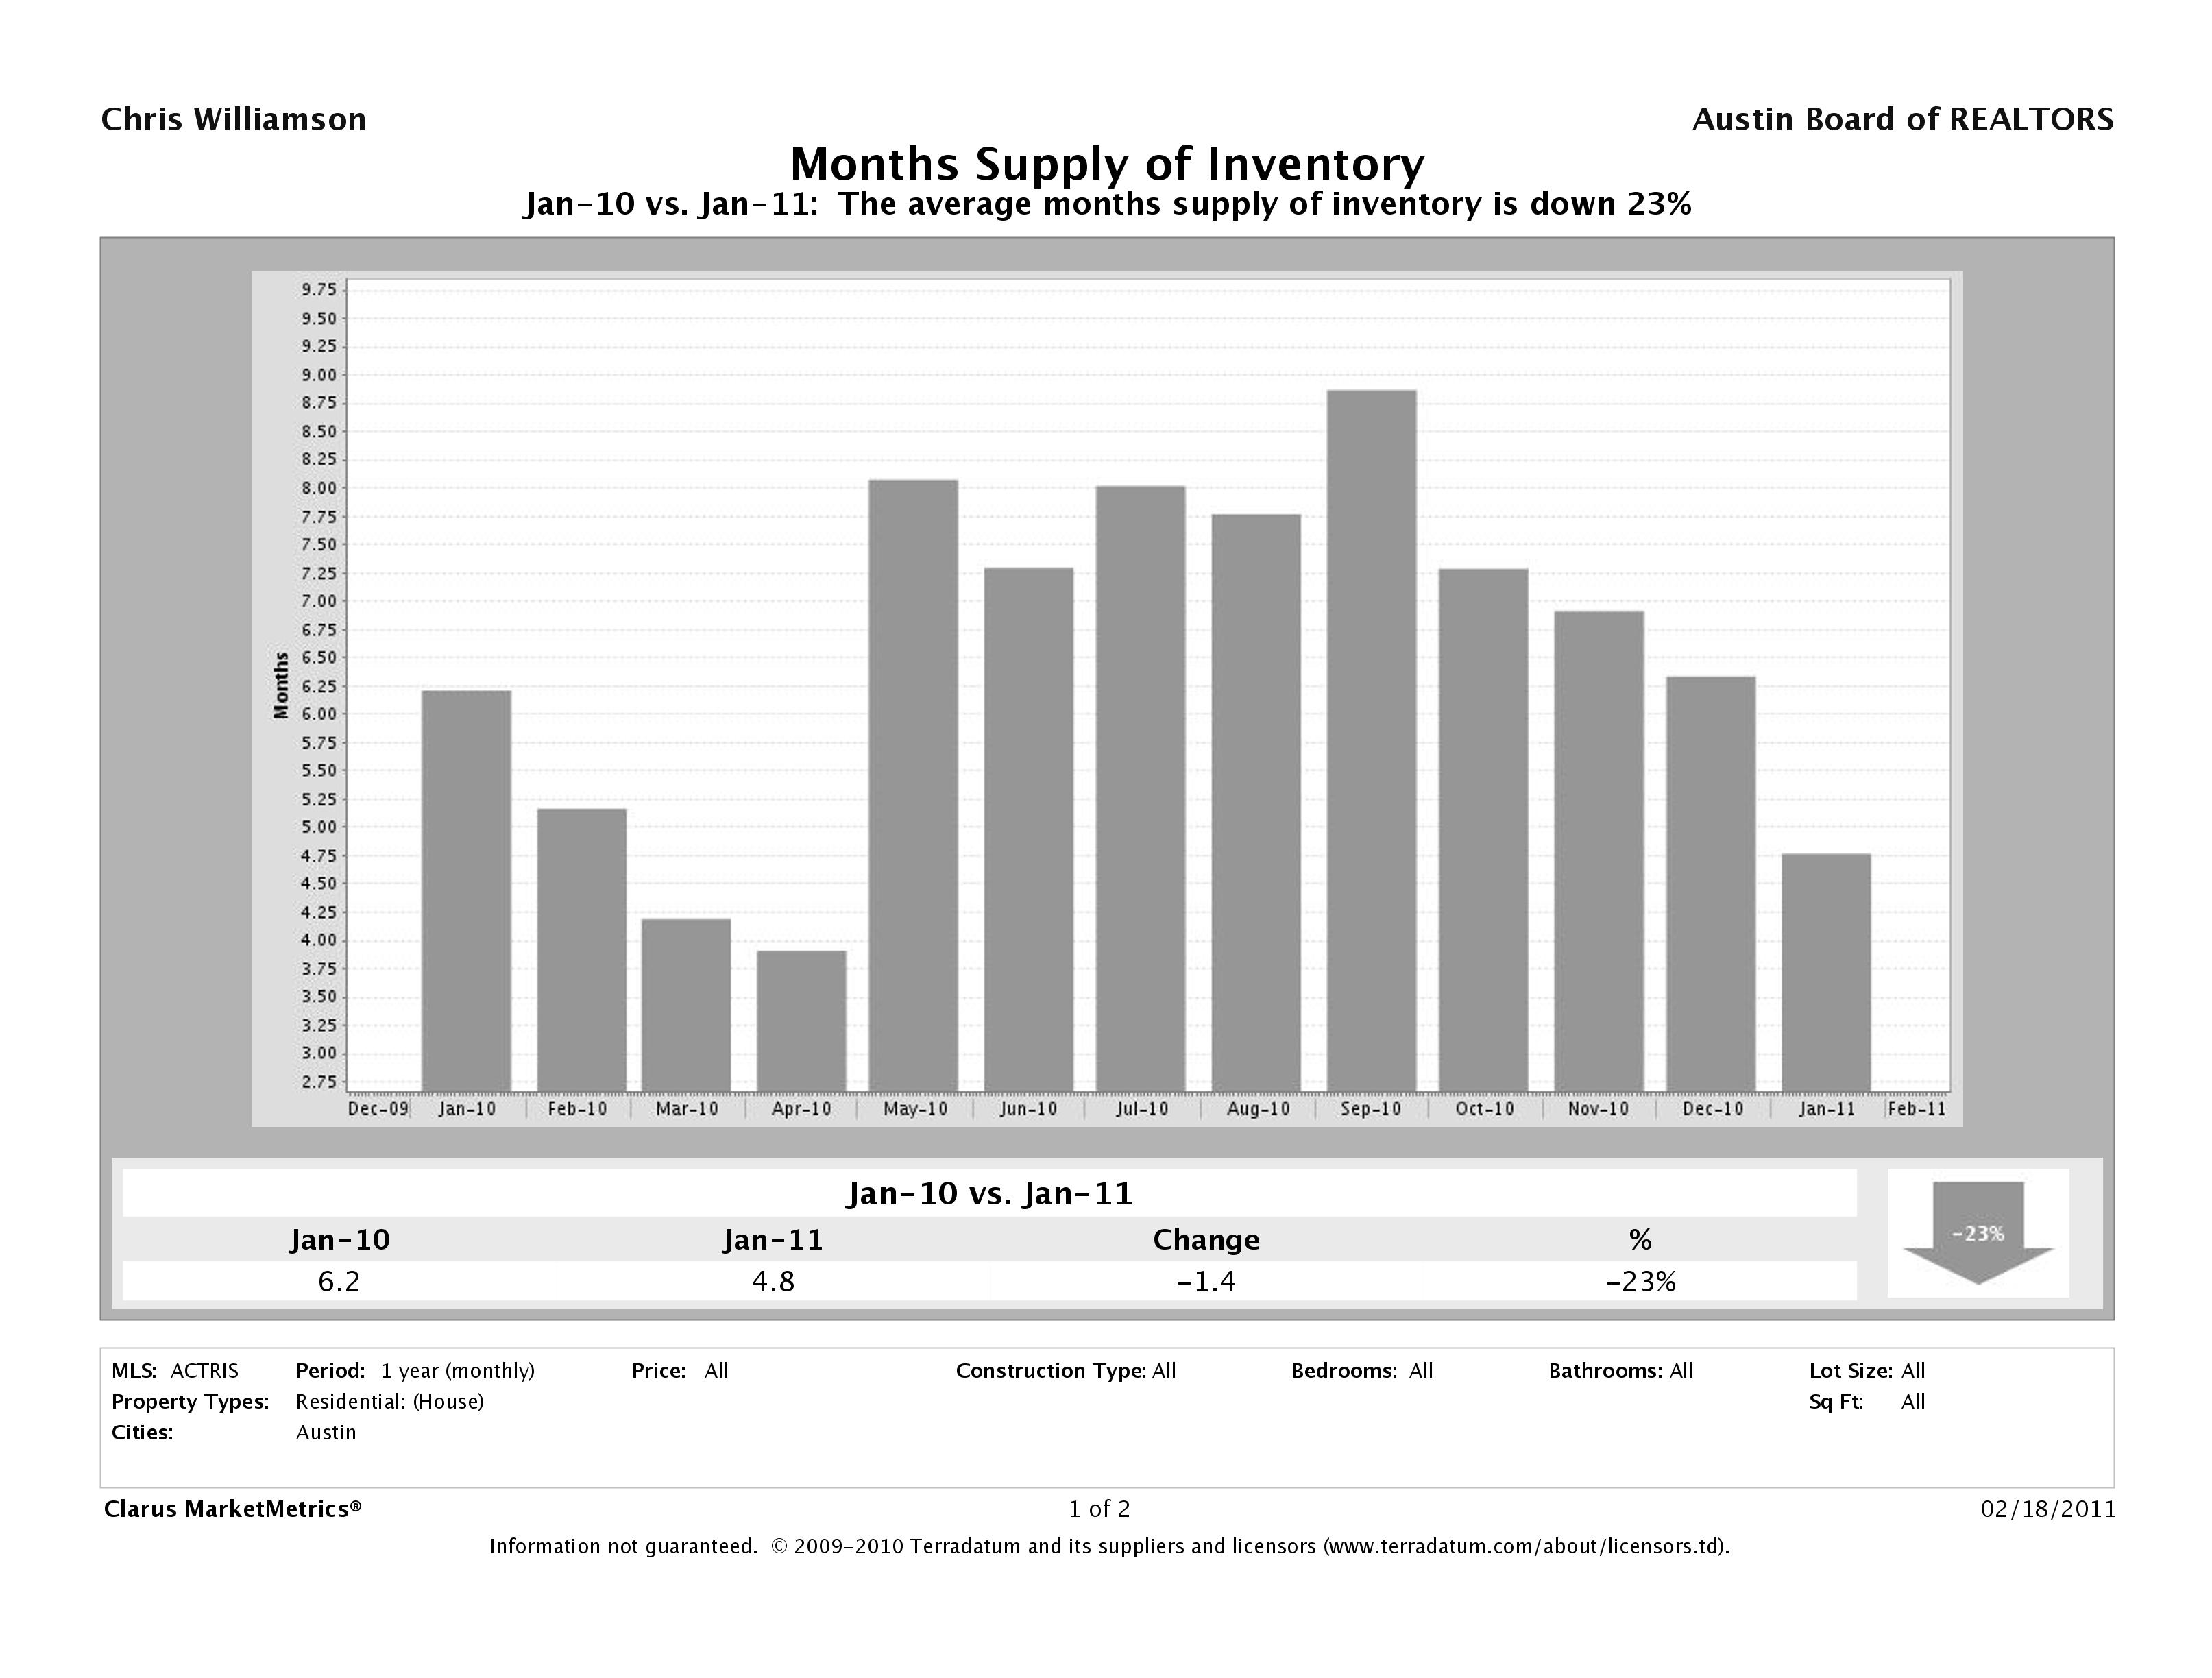 Austin Homes Months Supply of Inventory Jan 2011